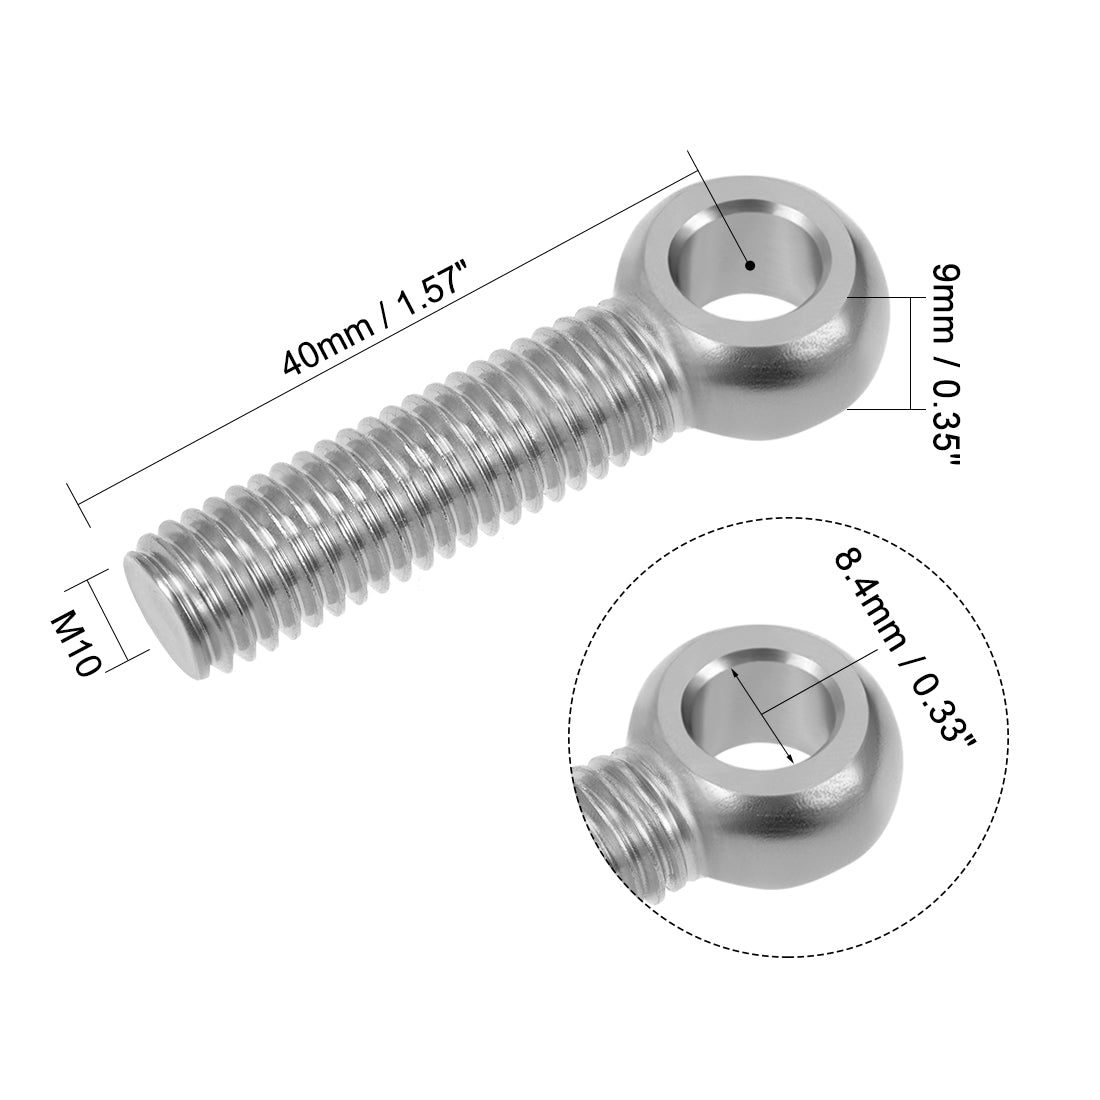 uxcell Uxcell M10 x 40mm Machinery Shoulder Swing Lifting Eye Bolt 304 Stainless Steel Metric Thread 2pcs